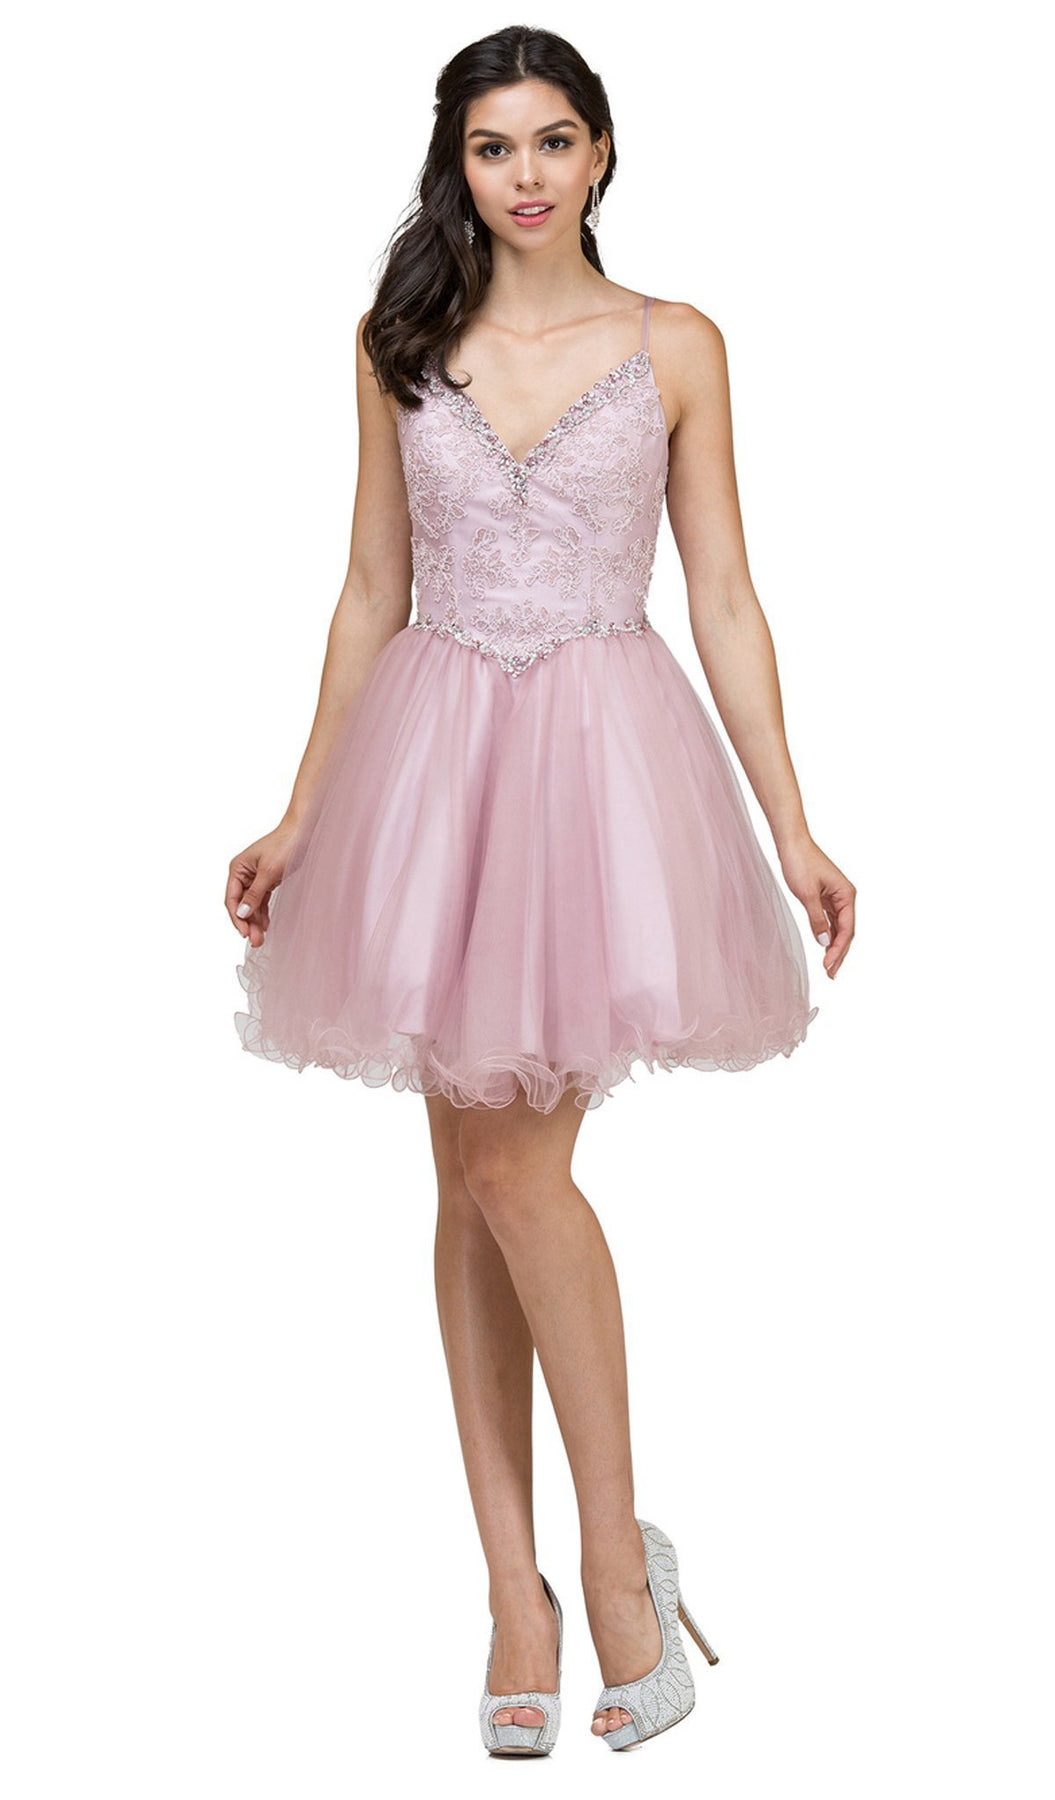 Dancing Queen - 2004 Beaded Floral Lace Tulle Cocktail Dress In Pink